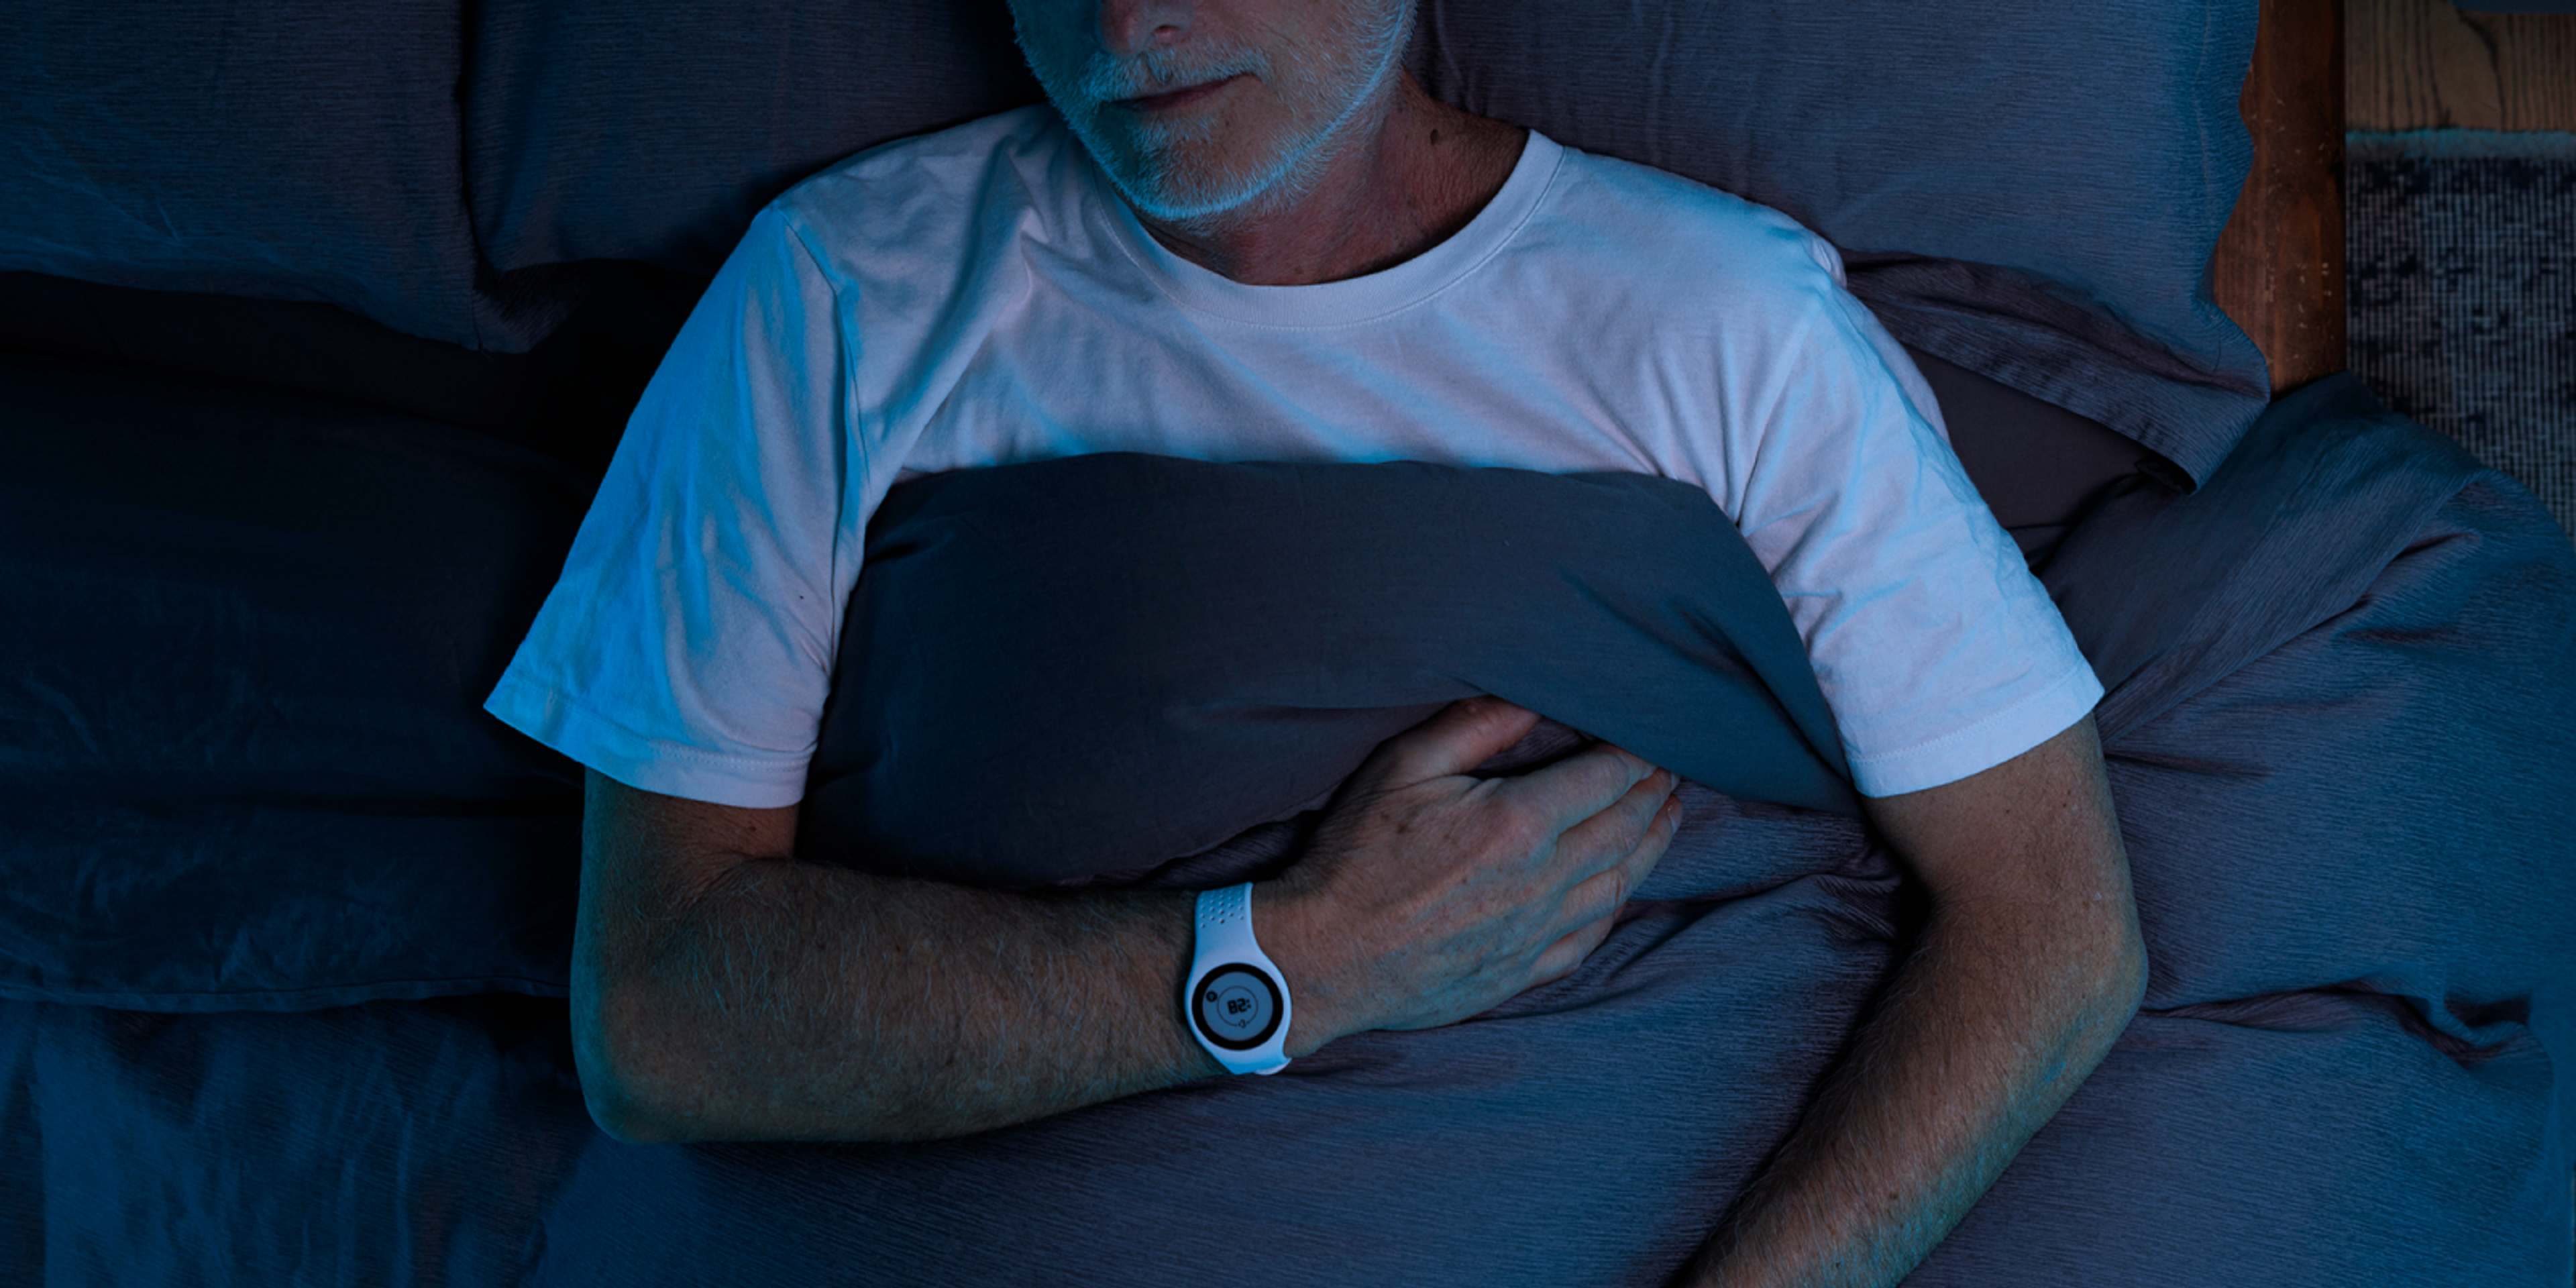 A reliable solution to measure sleep and physical activity from patients' homes